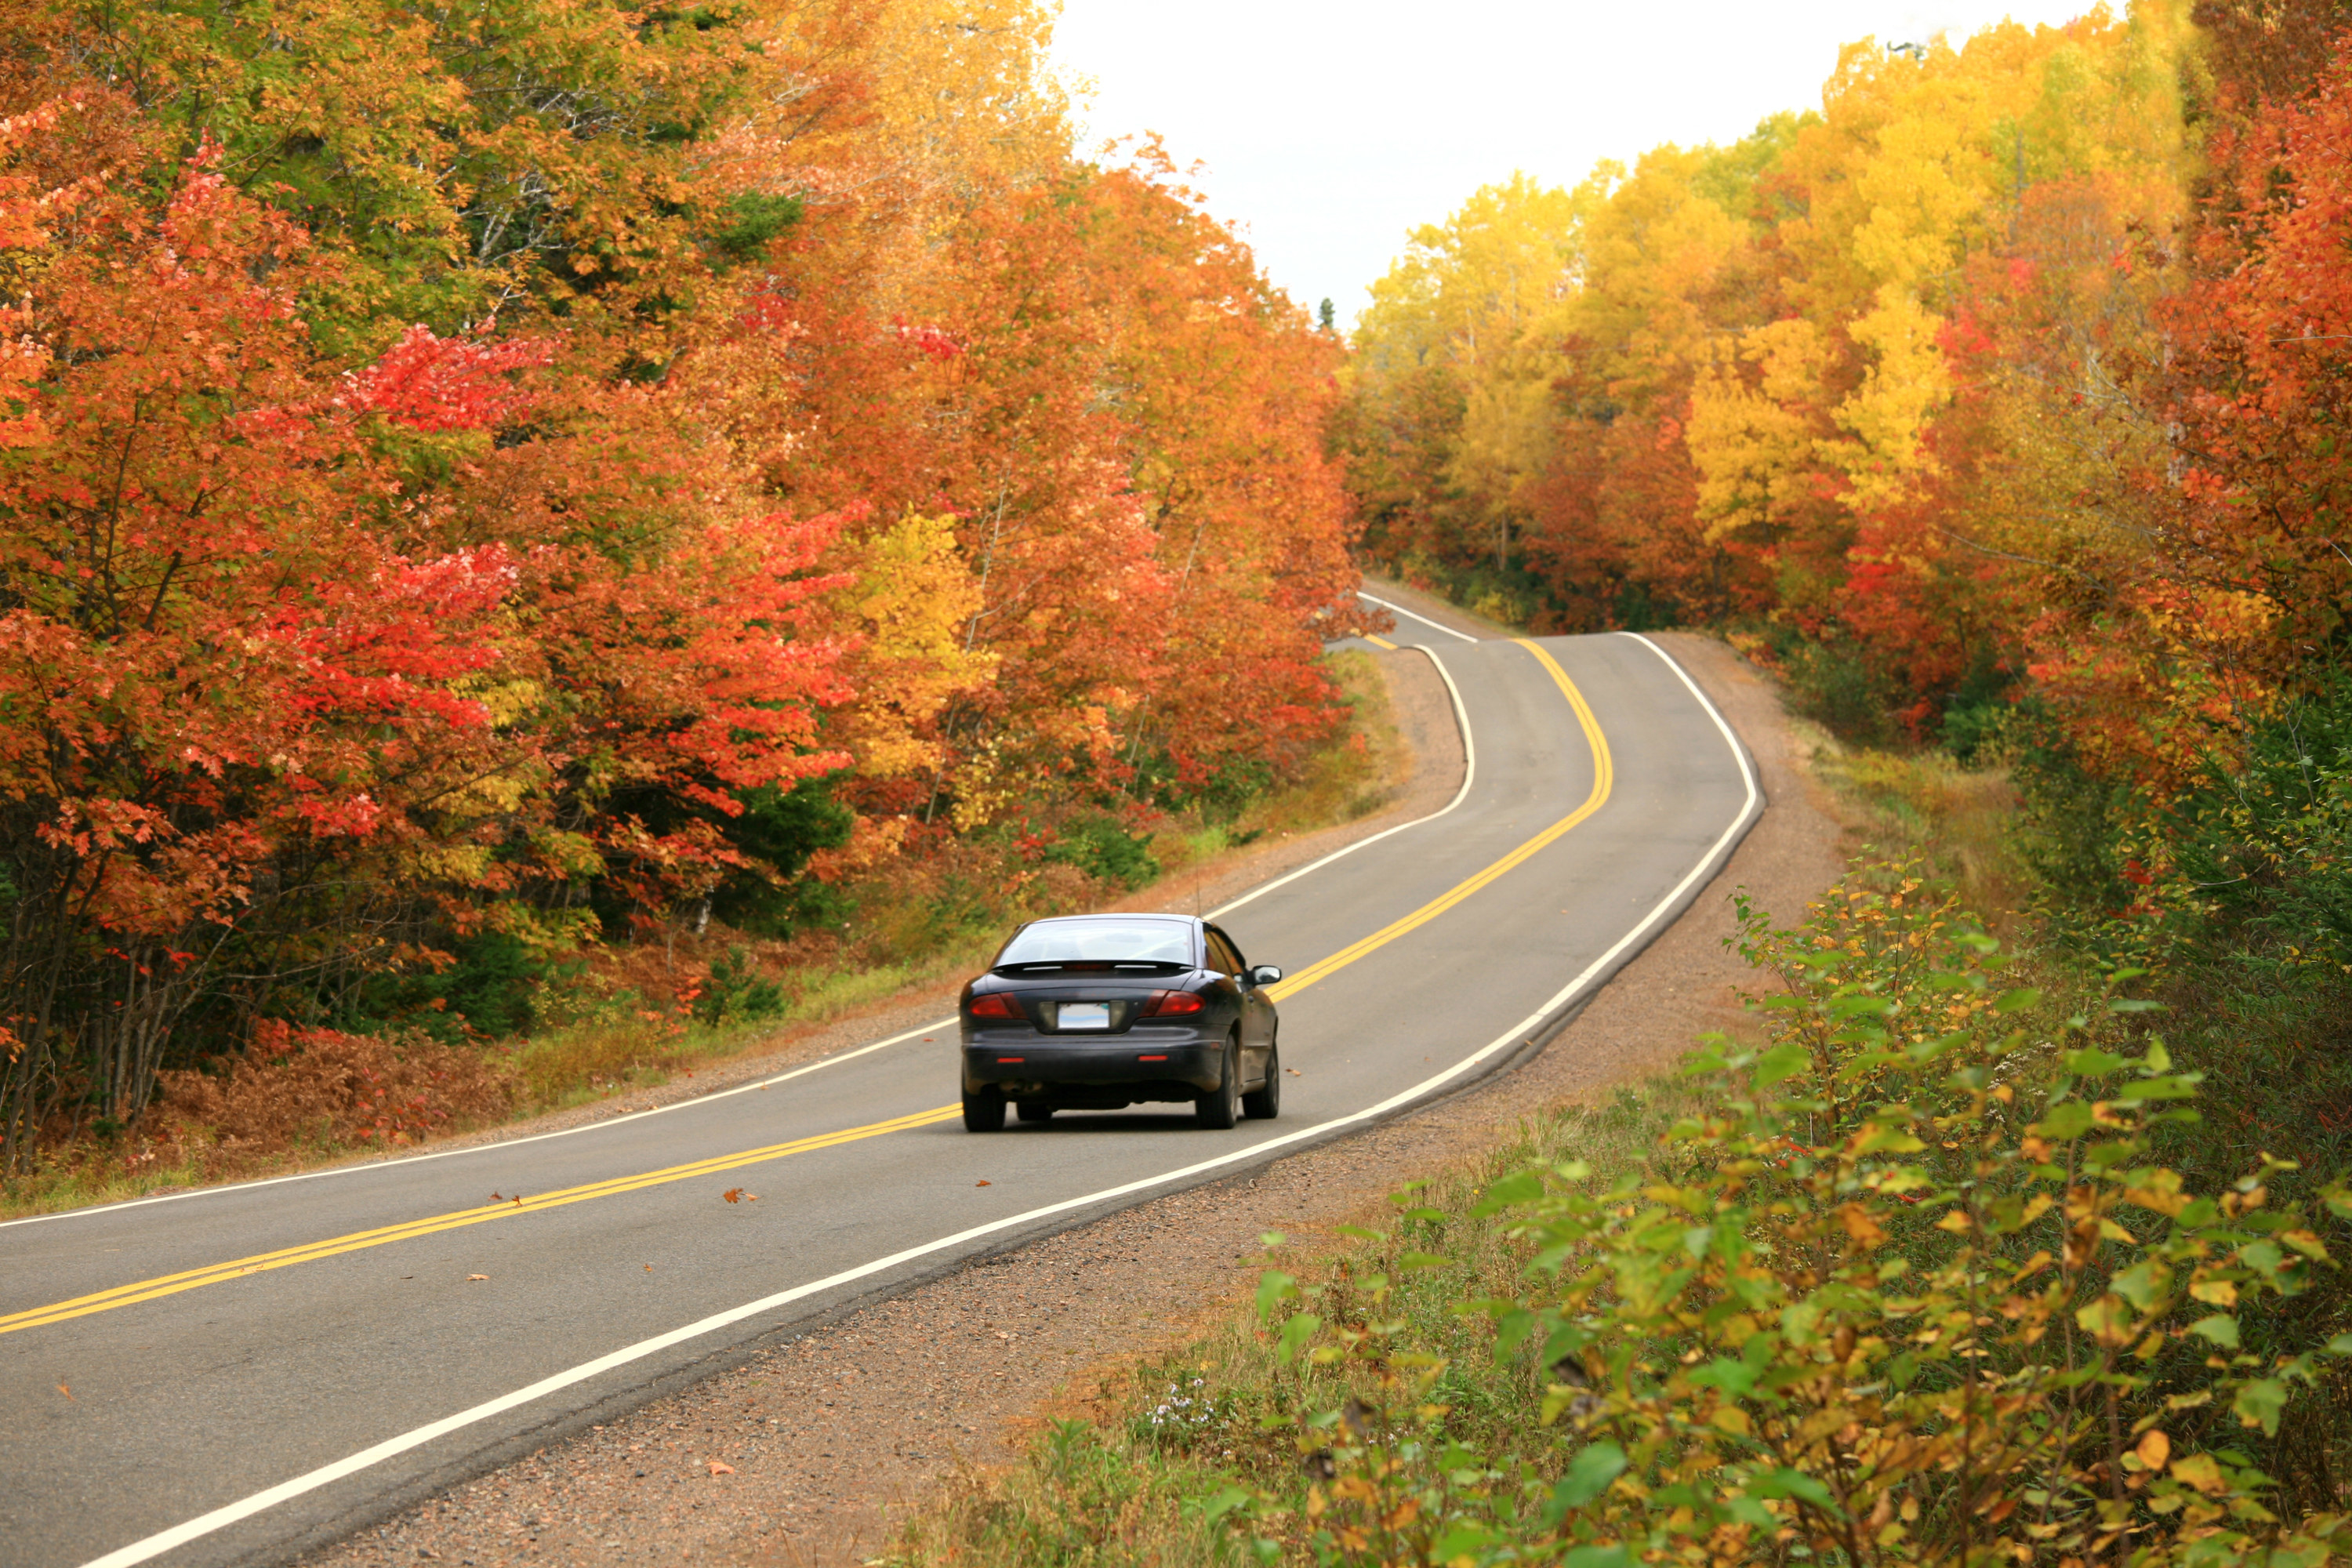 Car driving on a two-lane rural highway in autumn